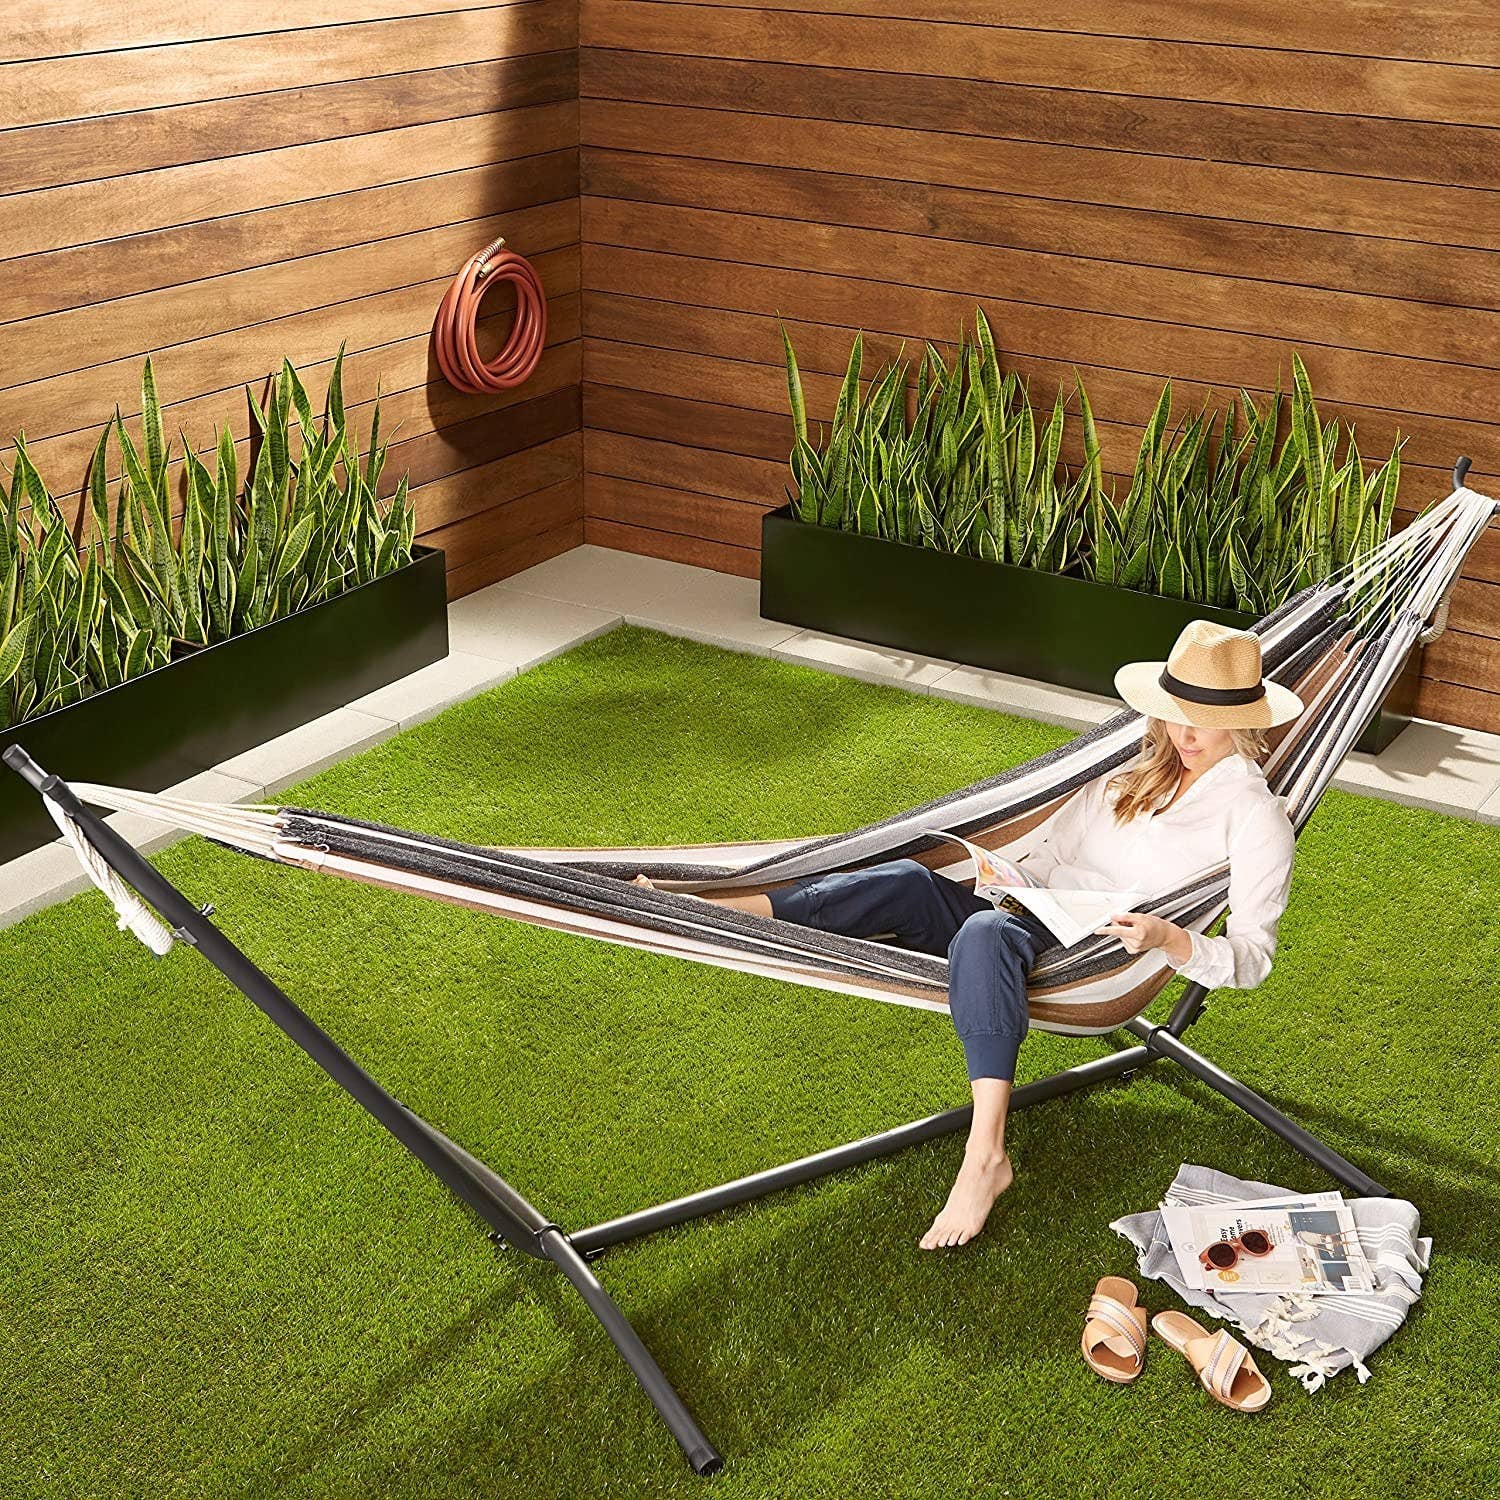 16 Cool And Useful Products For People Who Have A Home Garden